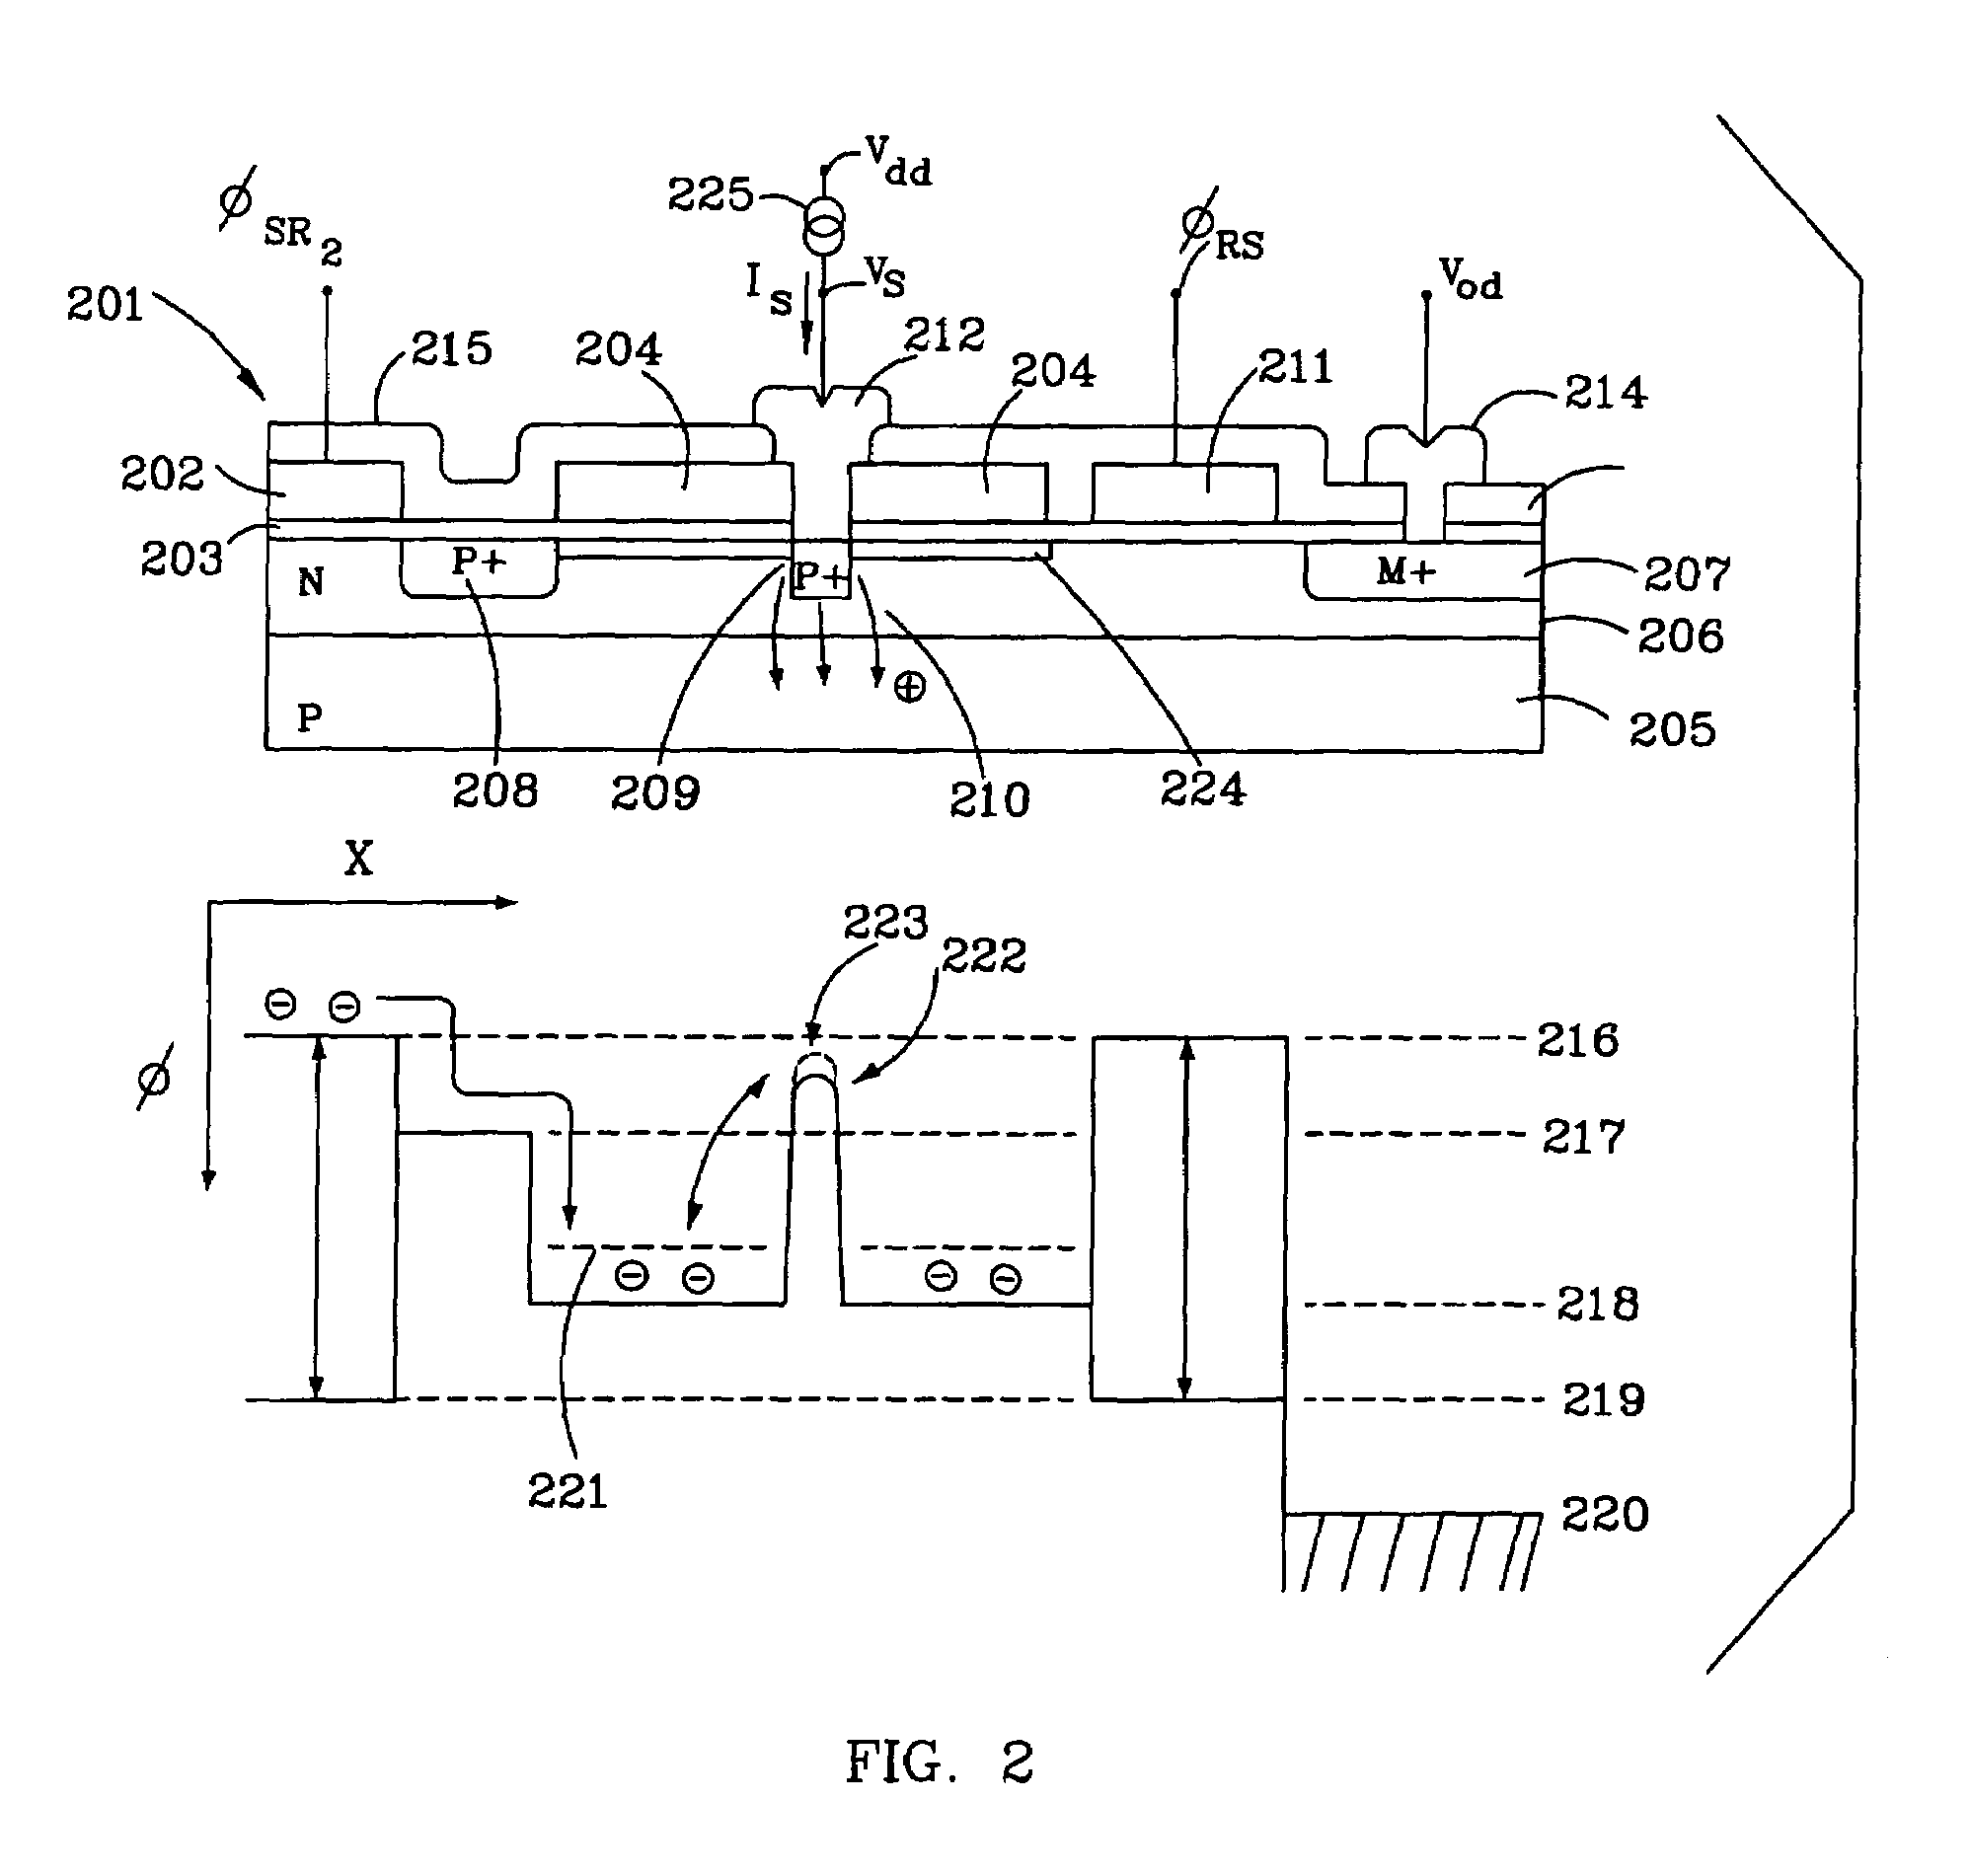 Gated vertical punch through device used as a high performance charge detection amplifier